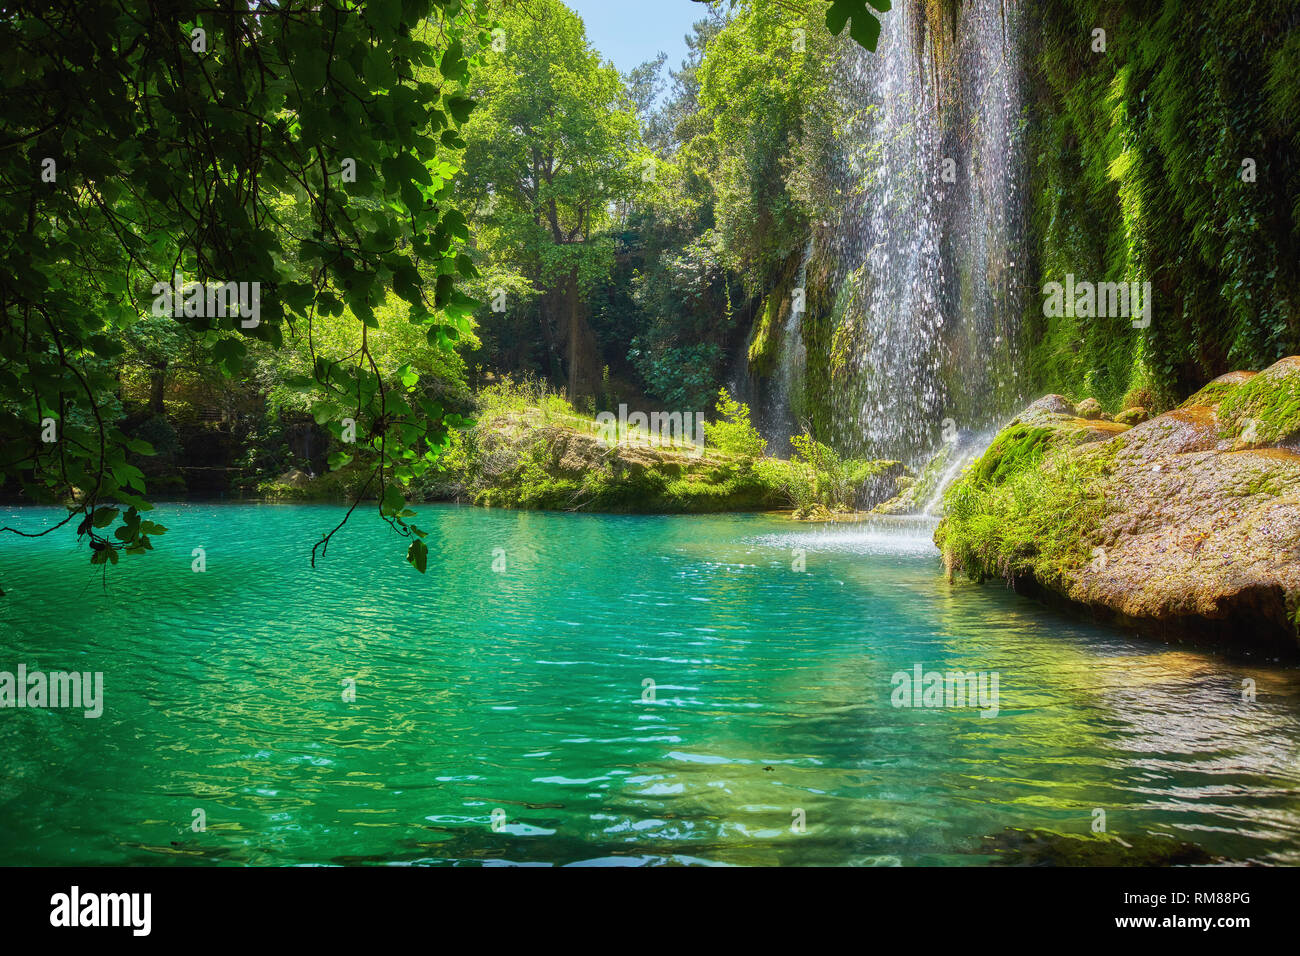 Pond with clear blue water in tropical forest Stock Photo